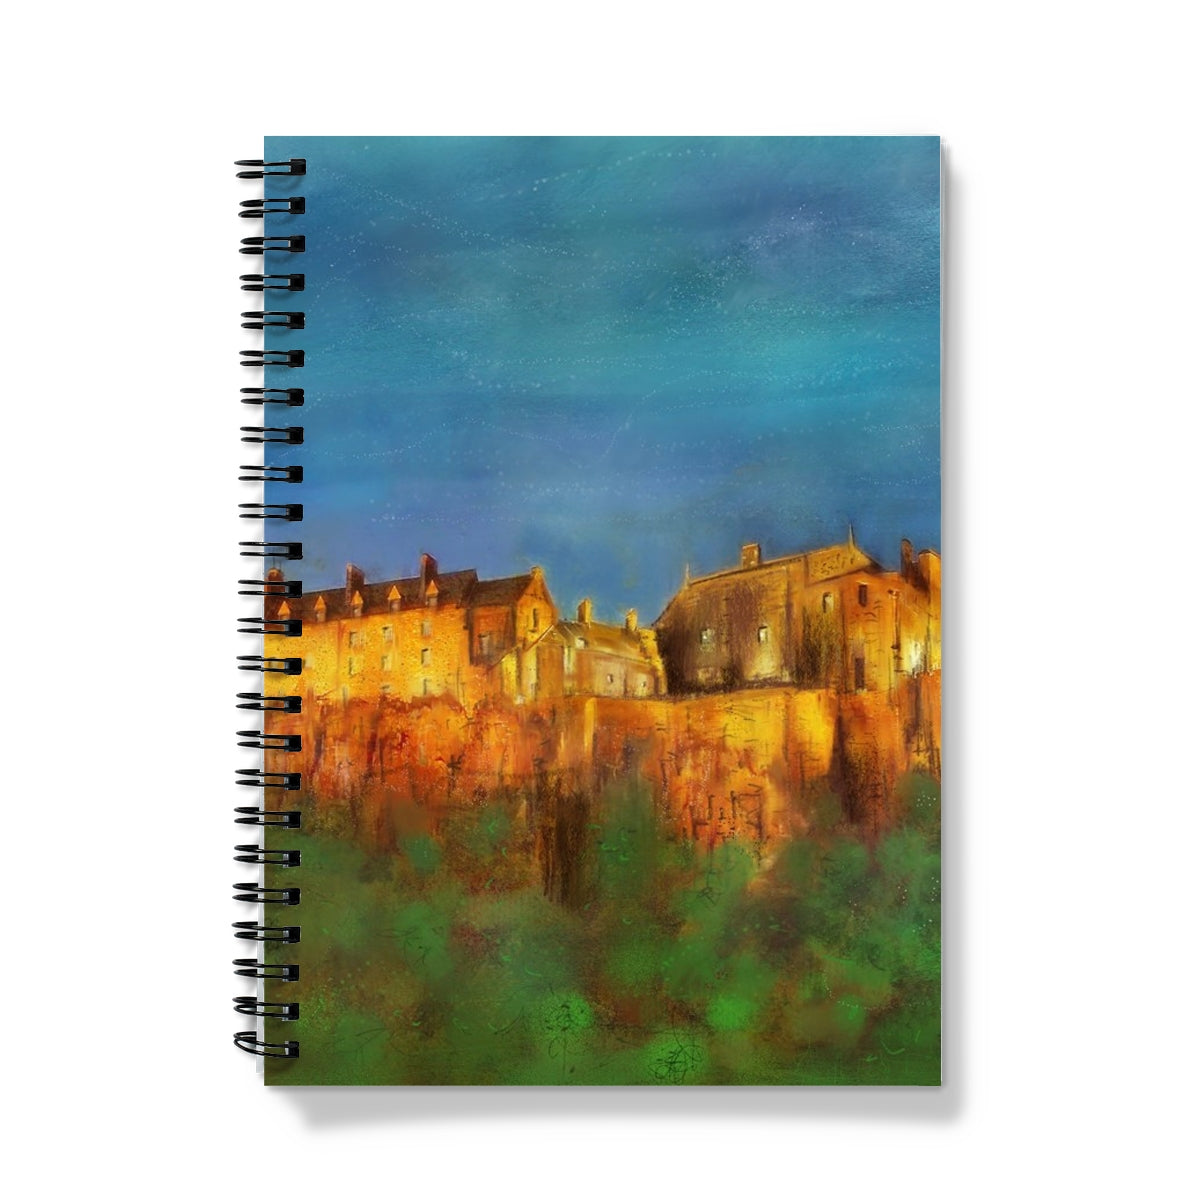 Stirling Castle Art Gifts Notebook-Journals & Notebooks-Historic & Iconic Scotland Art Gallery-A4-Graph-Paintings, Prints, Homeware, Art Gifts From Scotland By Scottish Artist Kevin Hunter